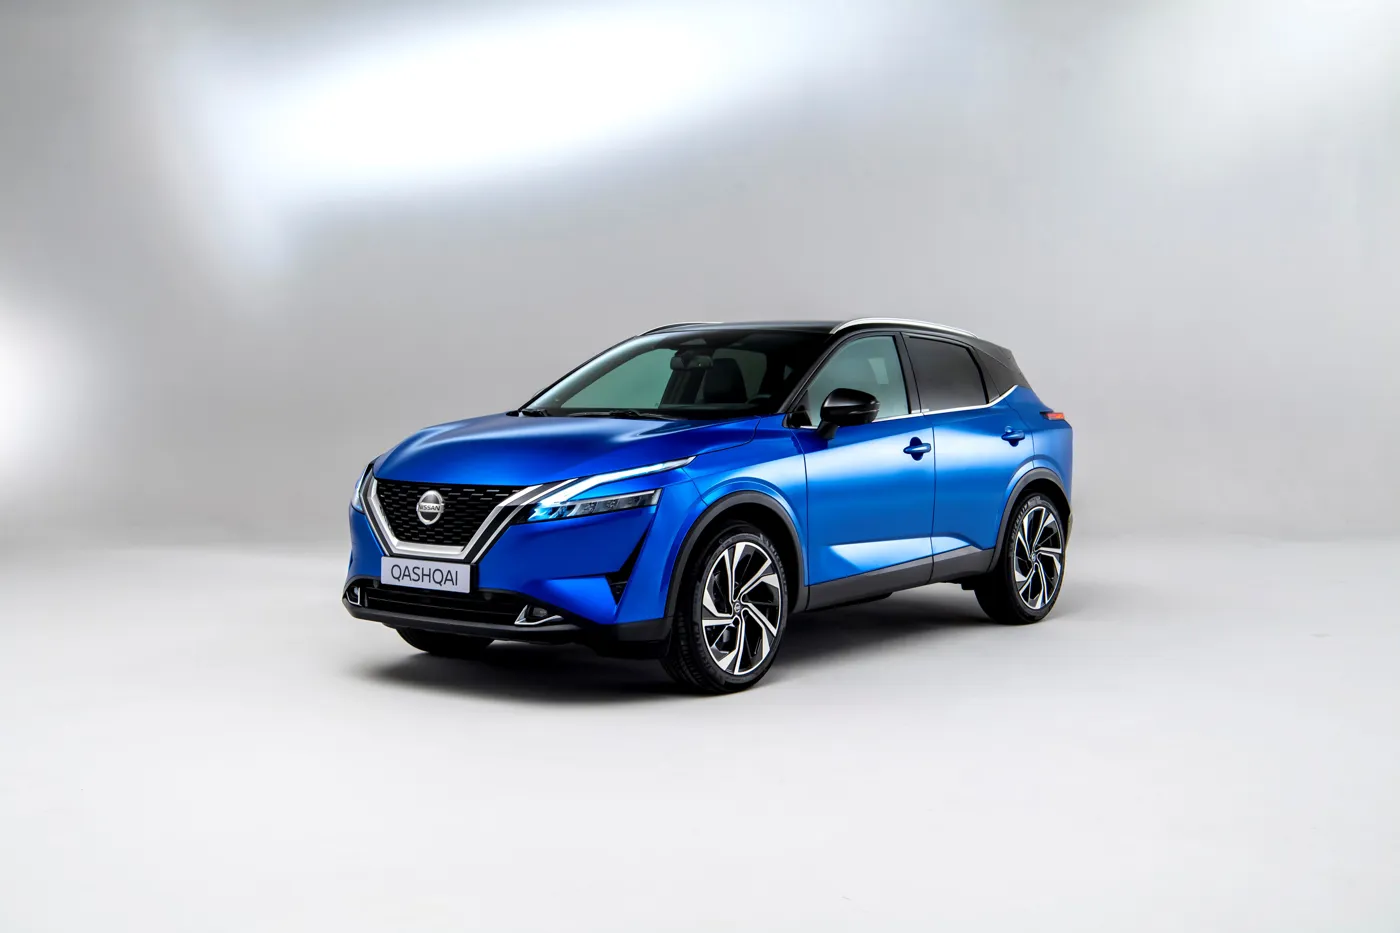 Nissan Qashqai: prices, specification and CO2 emissions